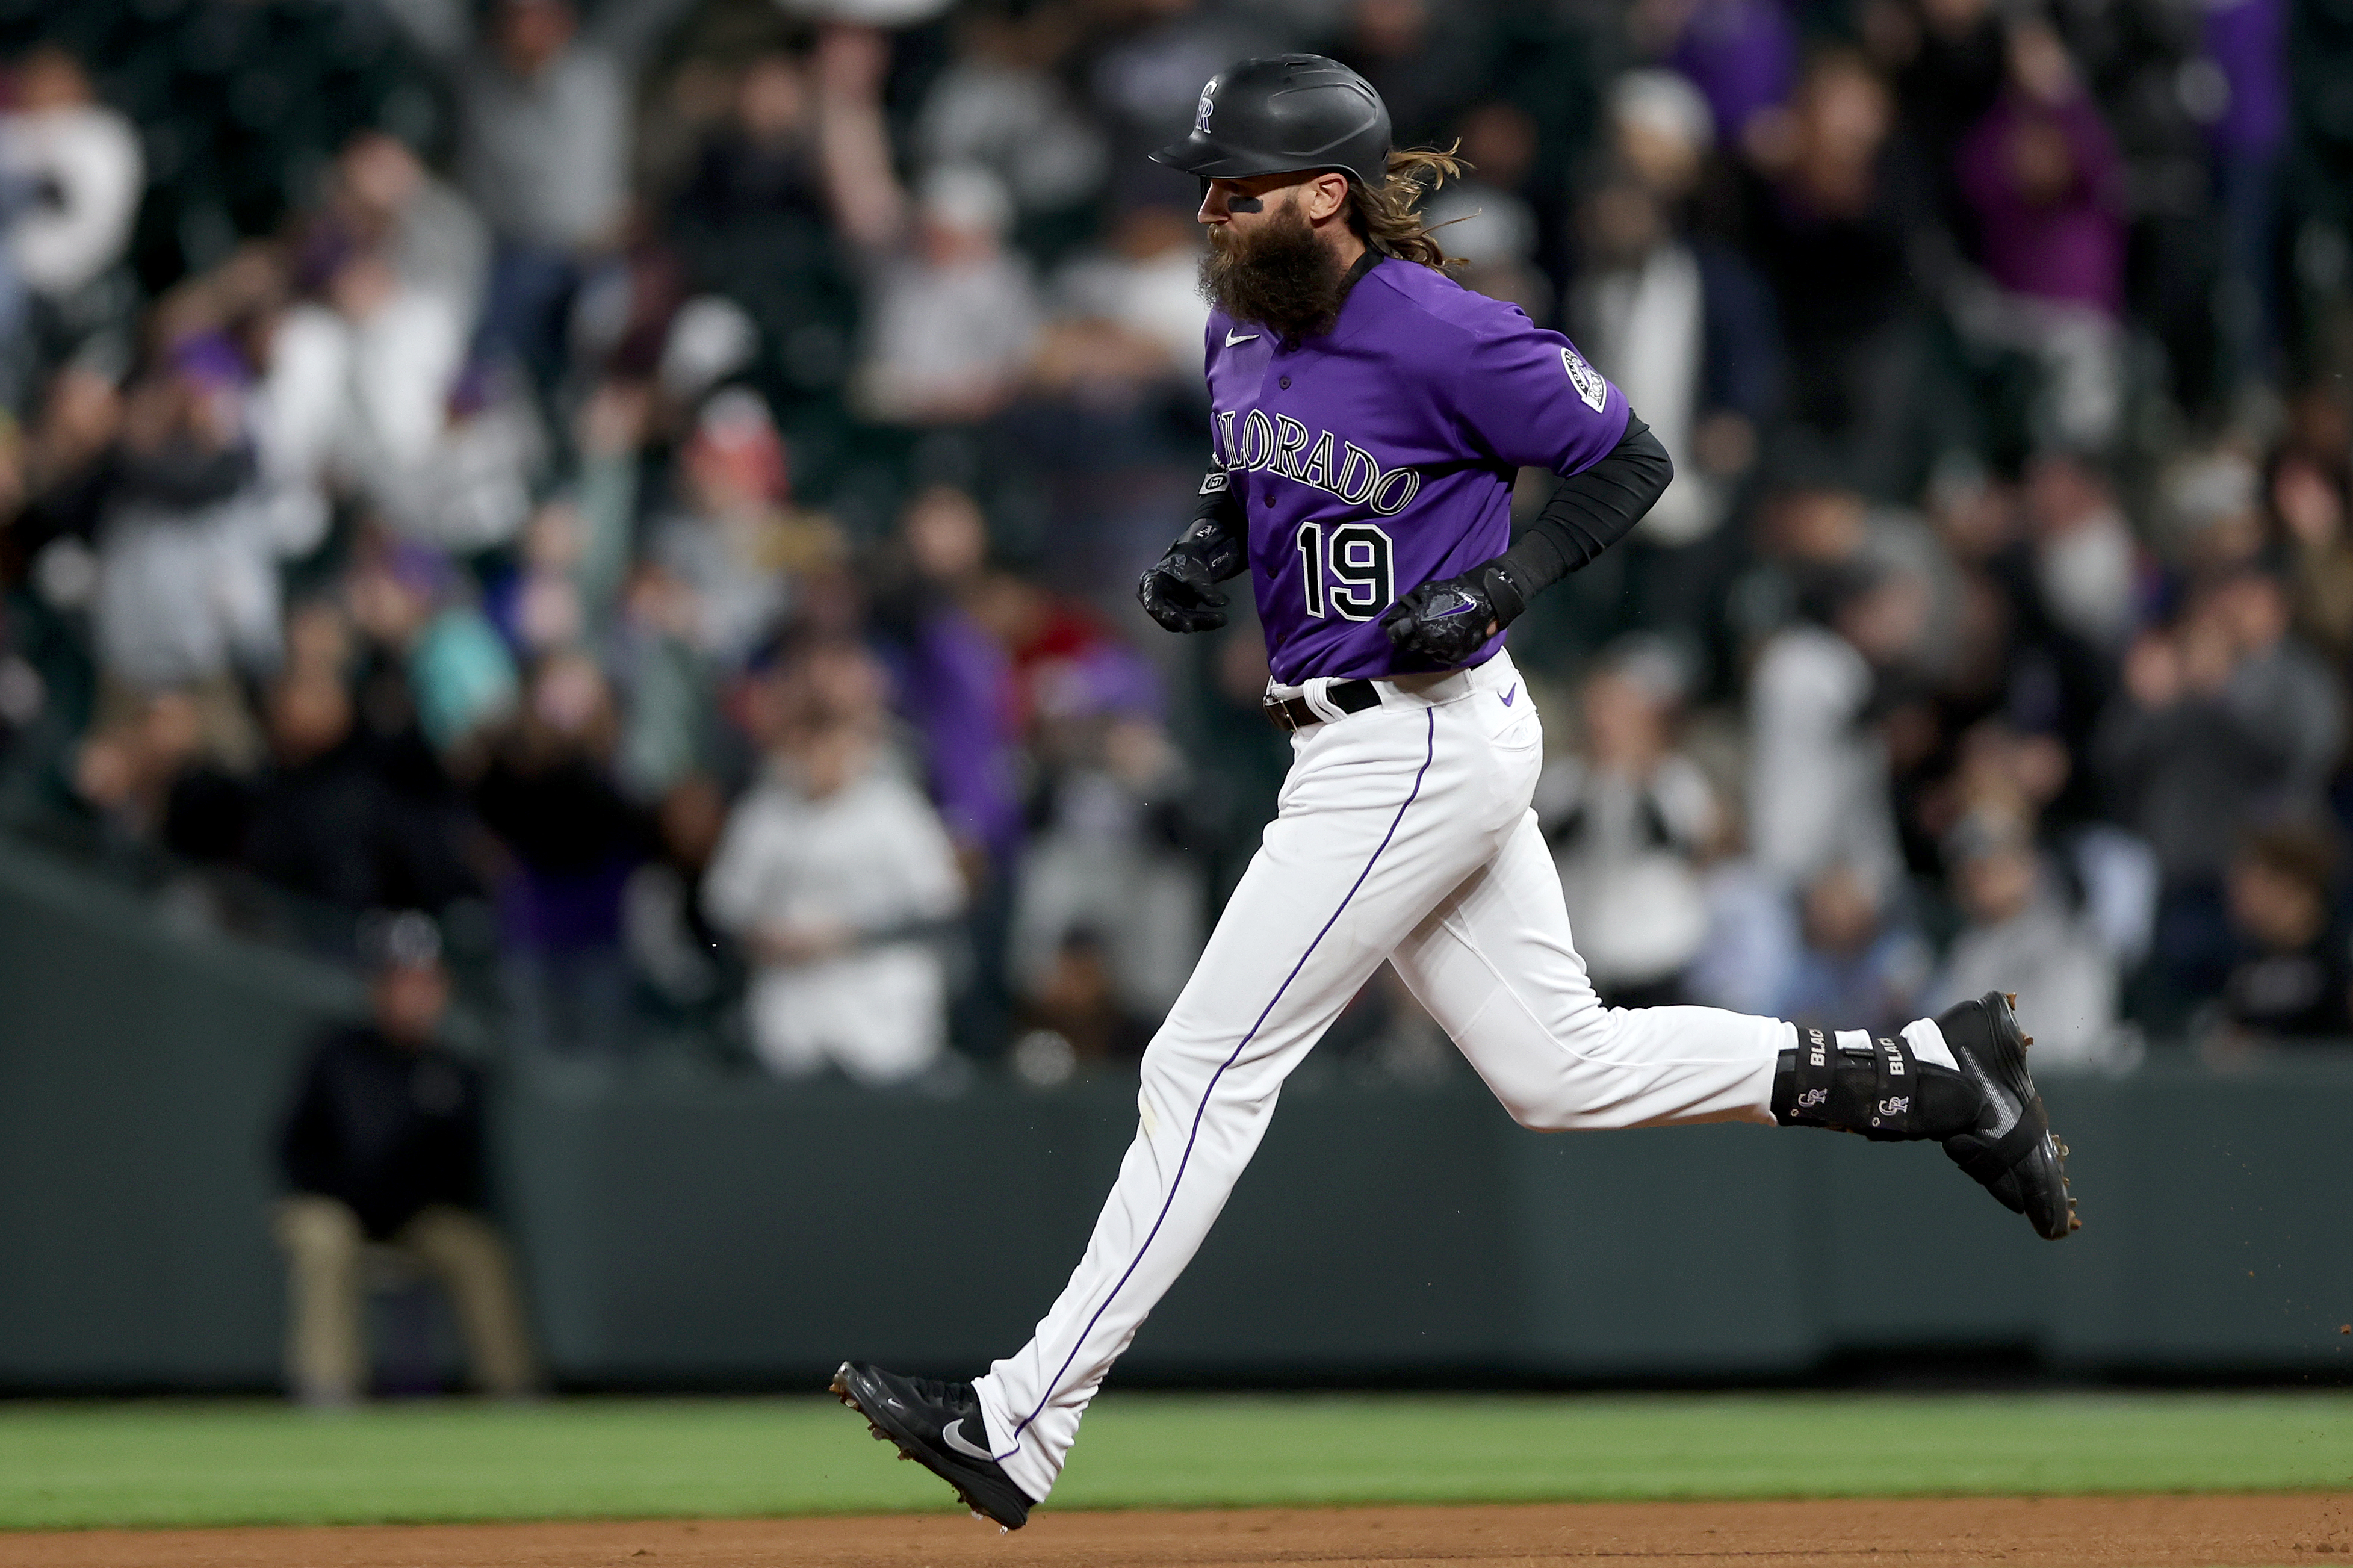 What's Next for Charlie Blackmon and the Colorado Rockies?